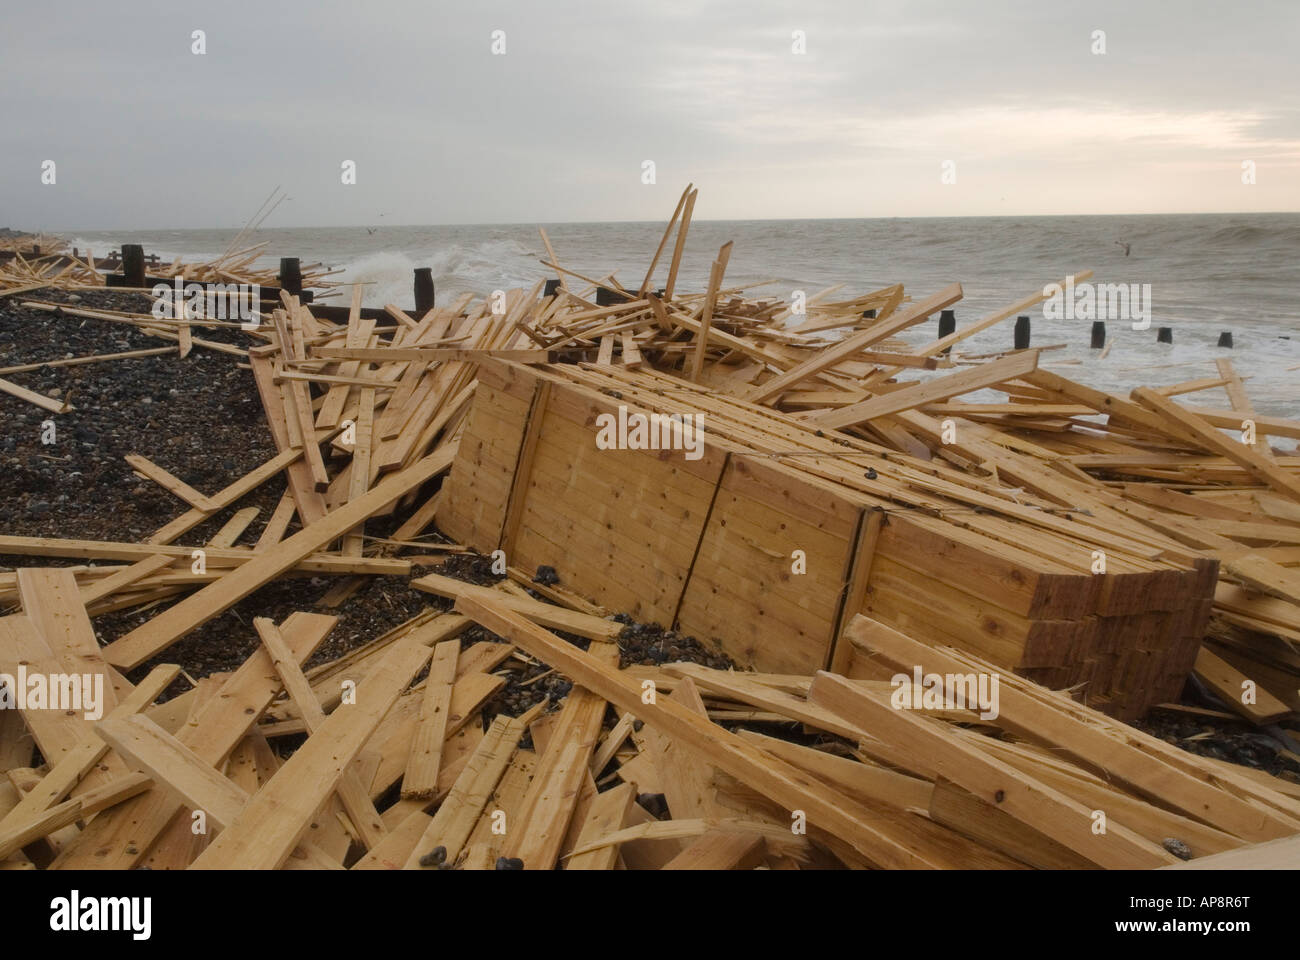 Beach Worthing West Sussex England Planks of wood from freighter the “^Ice Prince” which sank in rough weather on January 15th Stock Photo